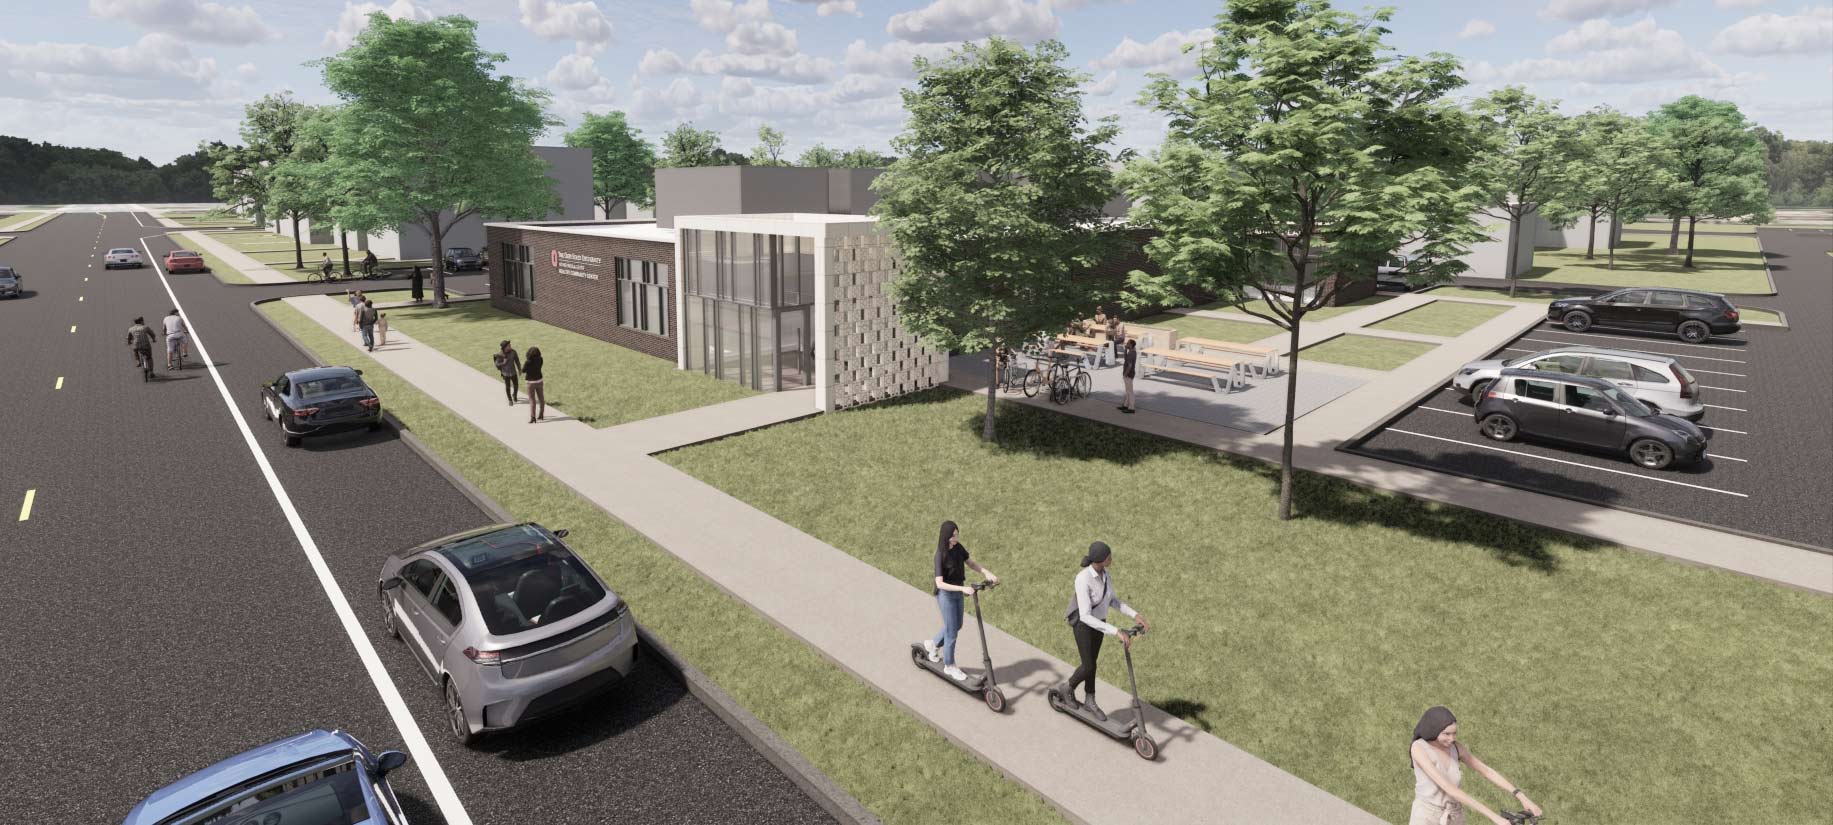 Rendering of the Healthy Community Center